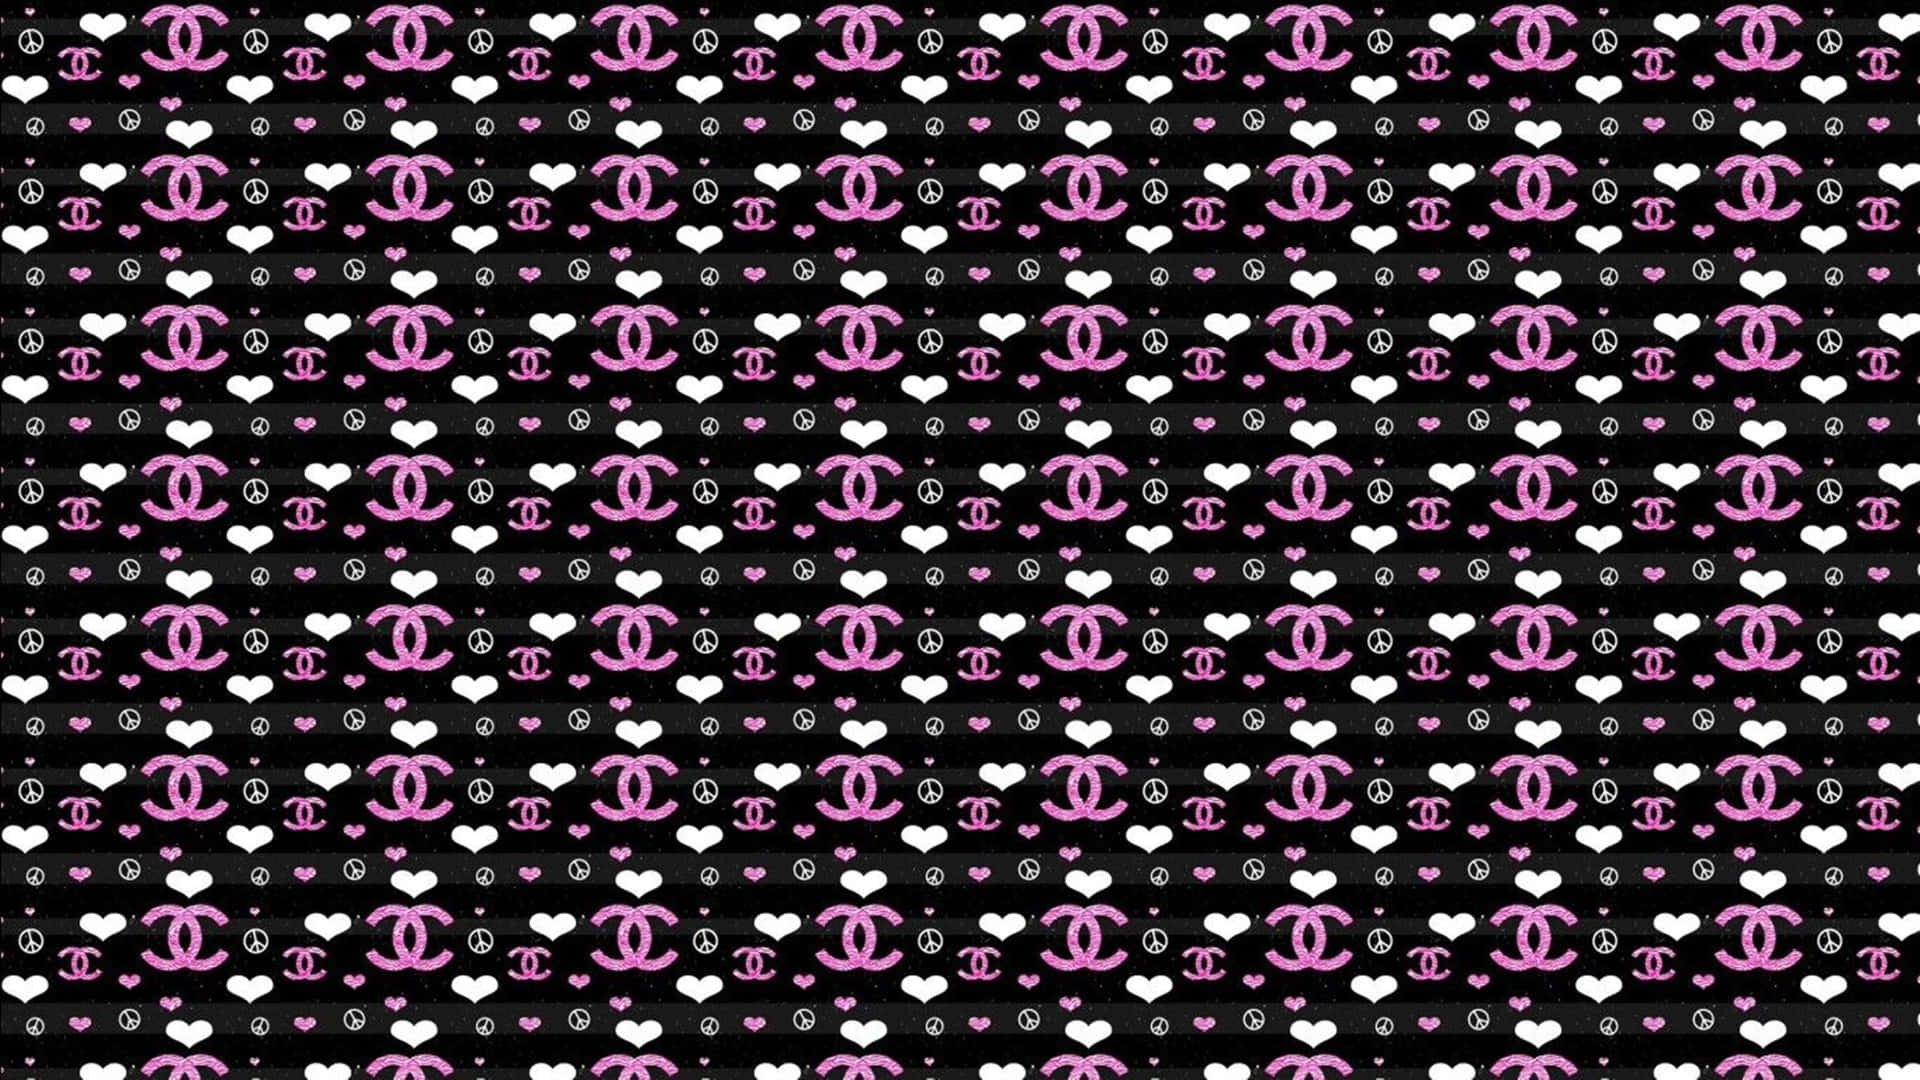 Get your girly look on with Chanel! Wallpaper